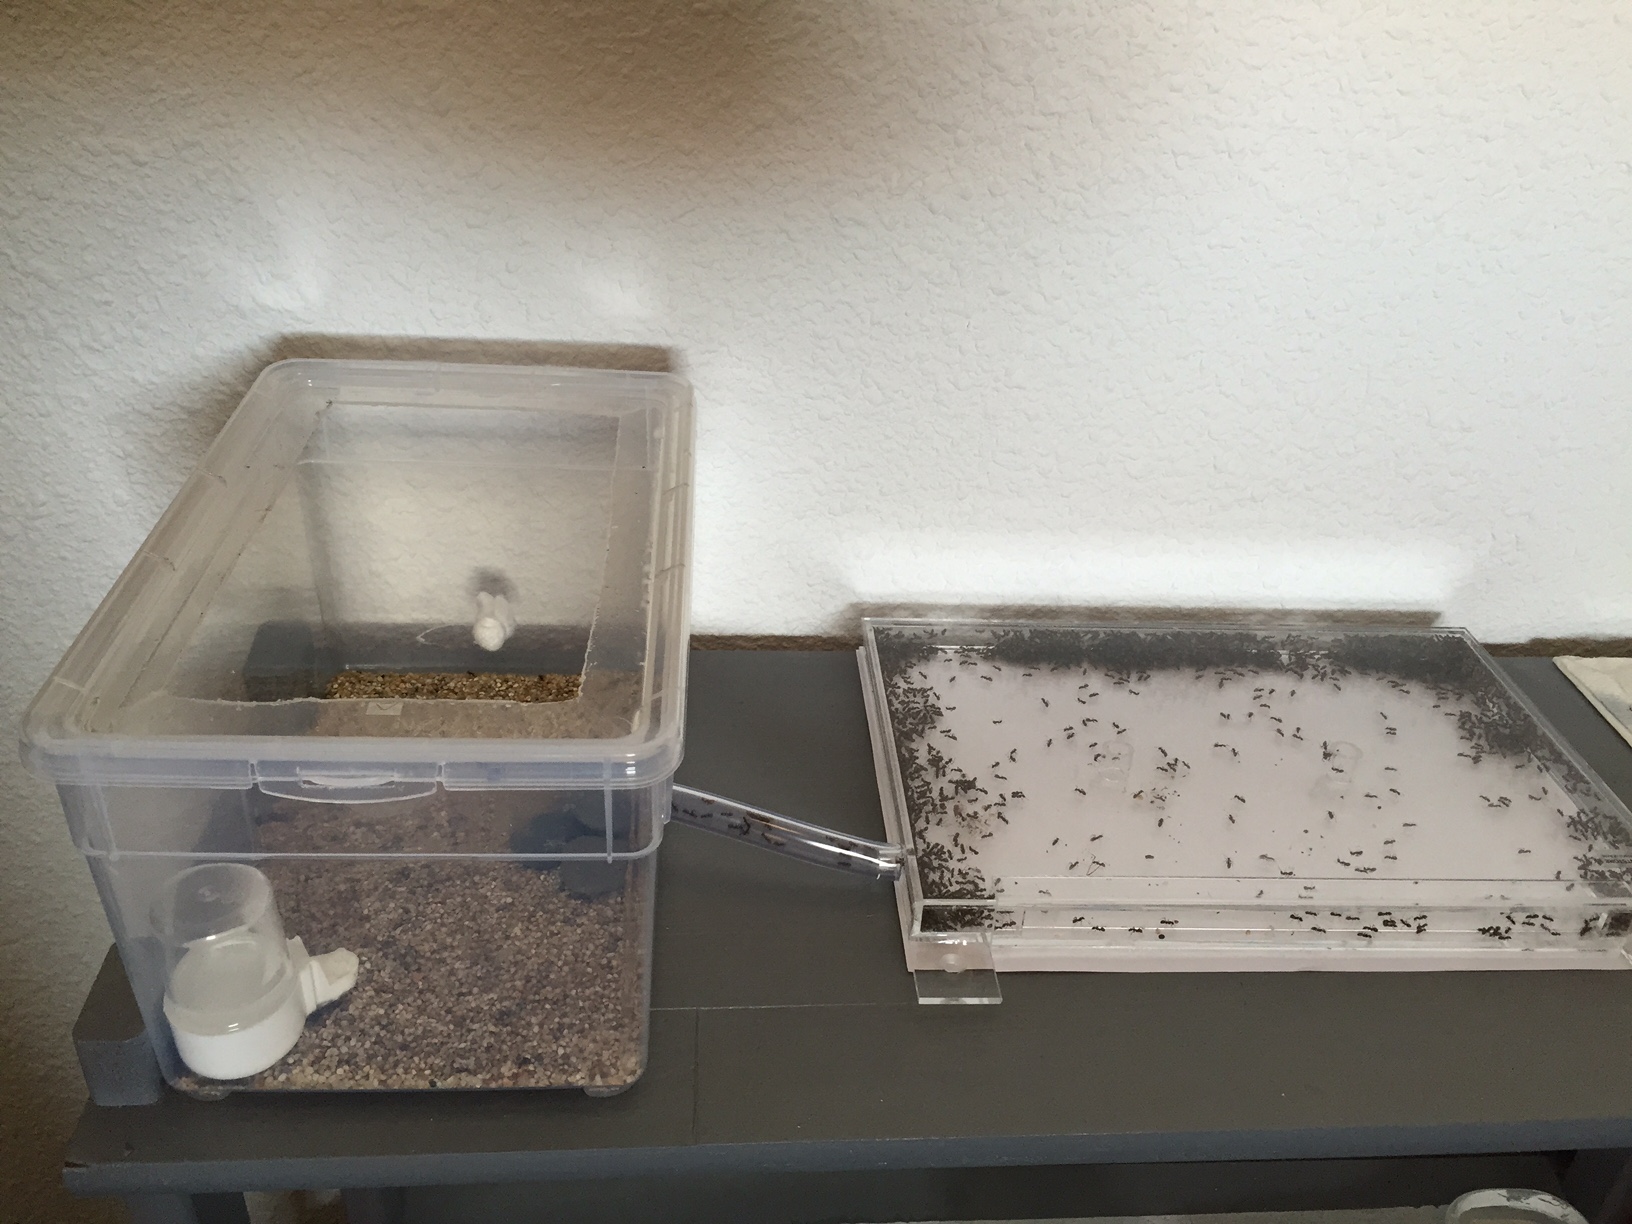 Presentation of my ant colonies